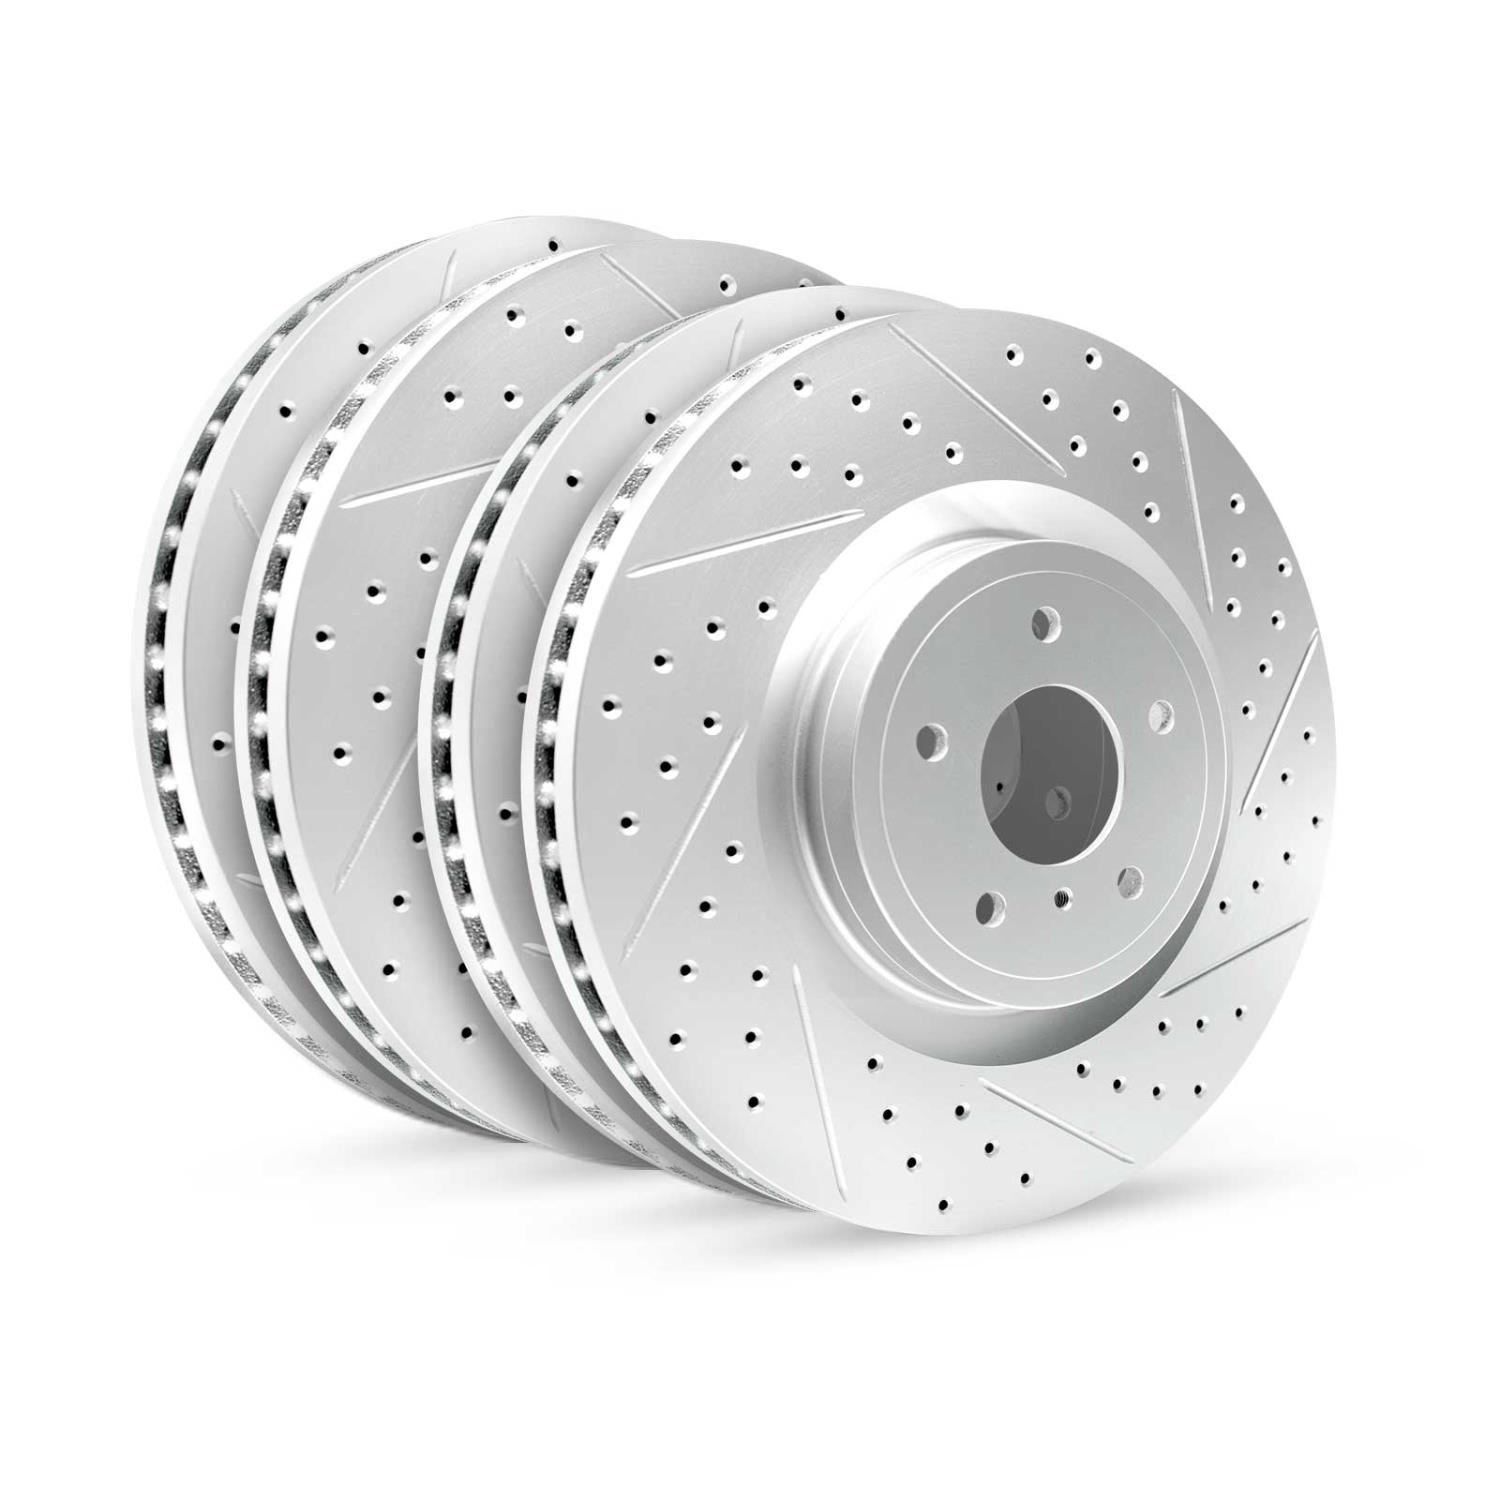 GEO-Carbon Drilled/Slotted Rotors, 2011-2018 BMW, Position: